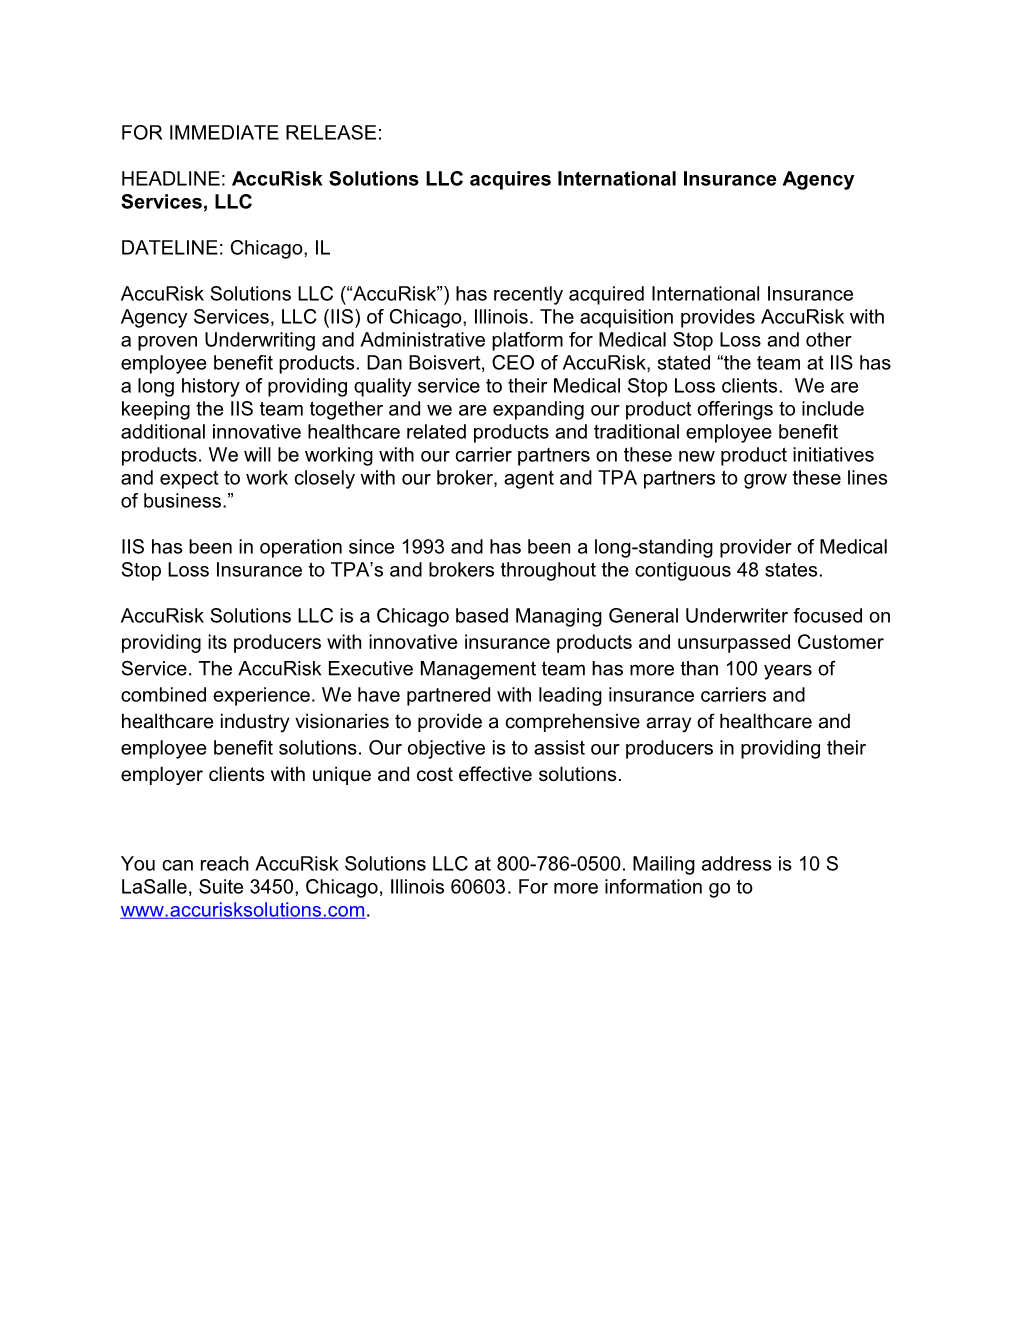 HEADLINE: Accurisk Solutions LLC Acquires International Insurance Agency Services, LLC